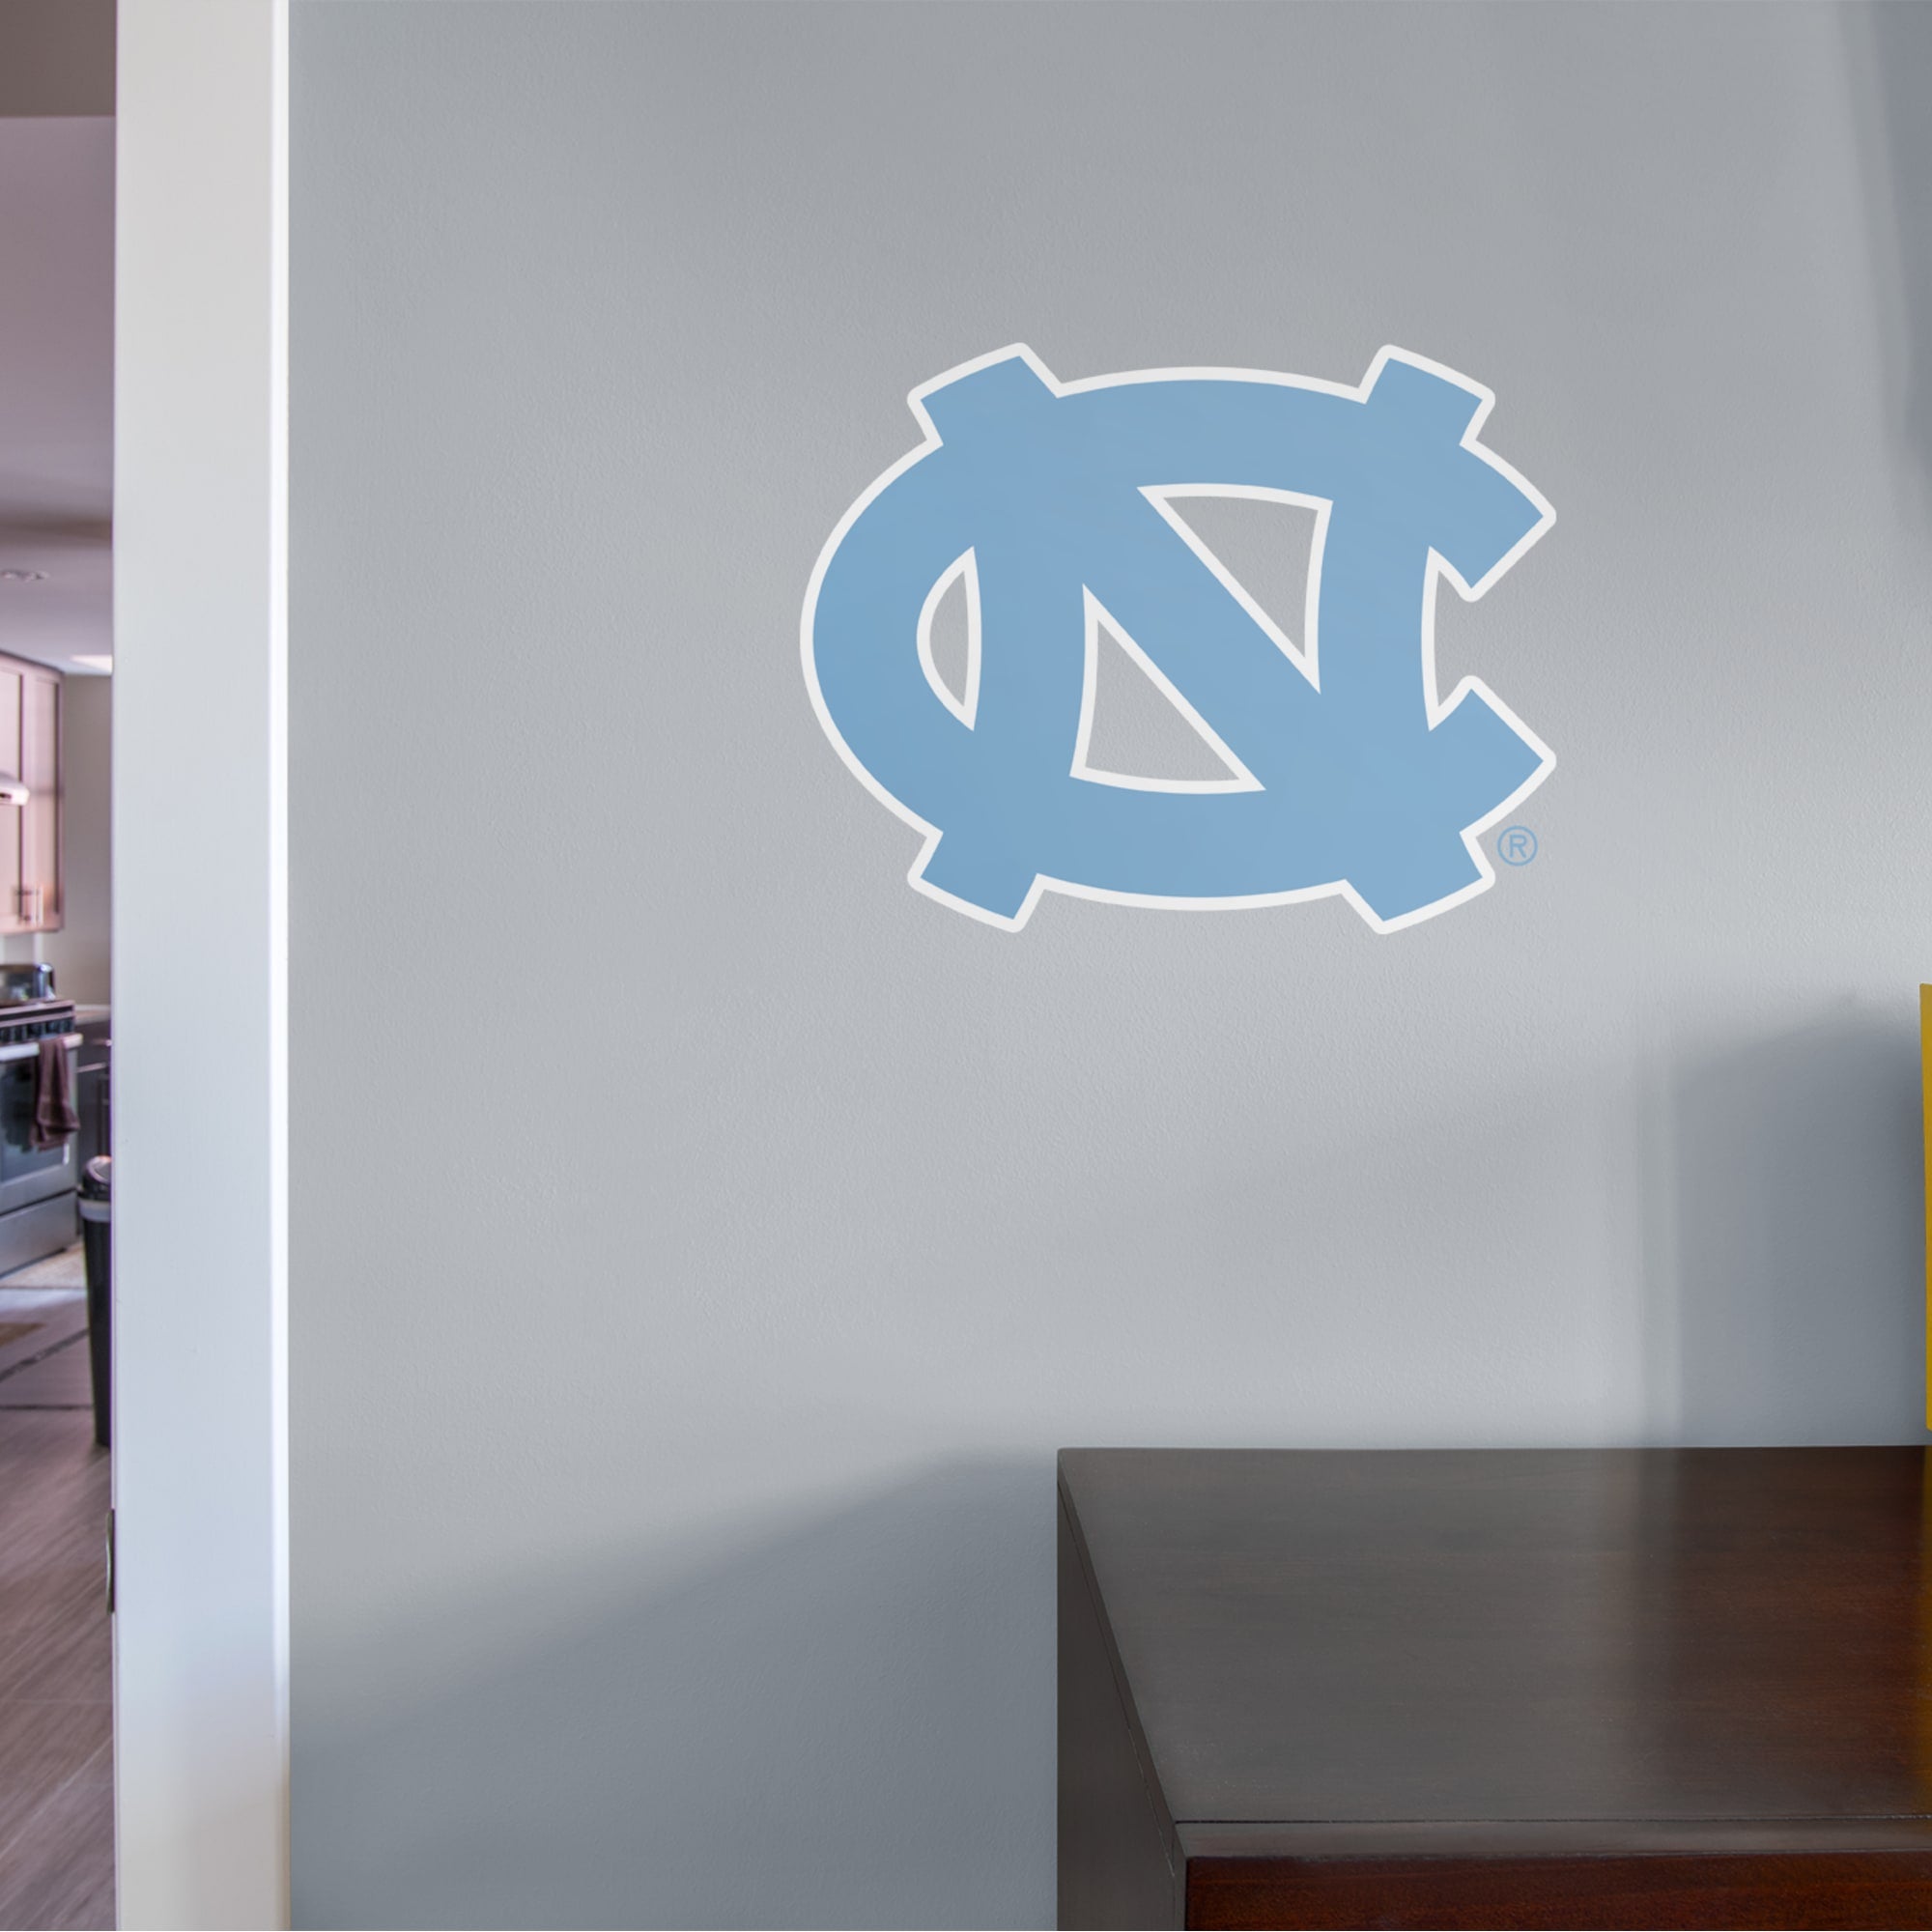 North Carolina Tar Heels: Logo - Officially Licensed Removable Wall Decal 11.0"W x 9.0"H by Fathead | Vinyl